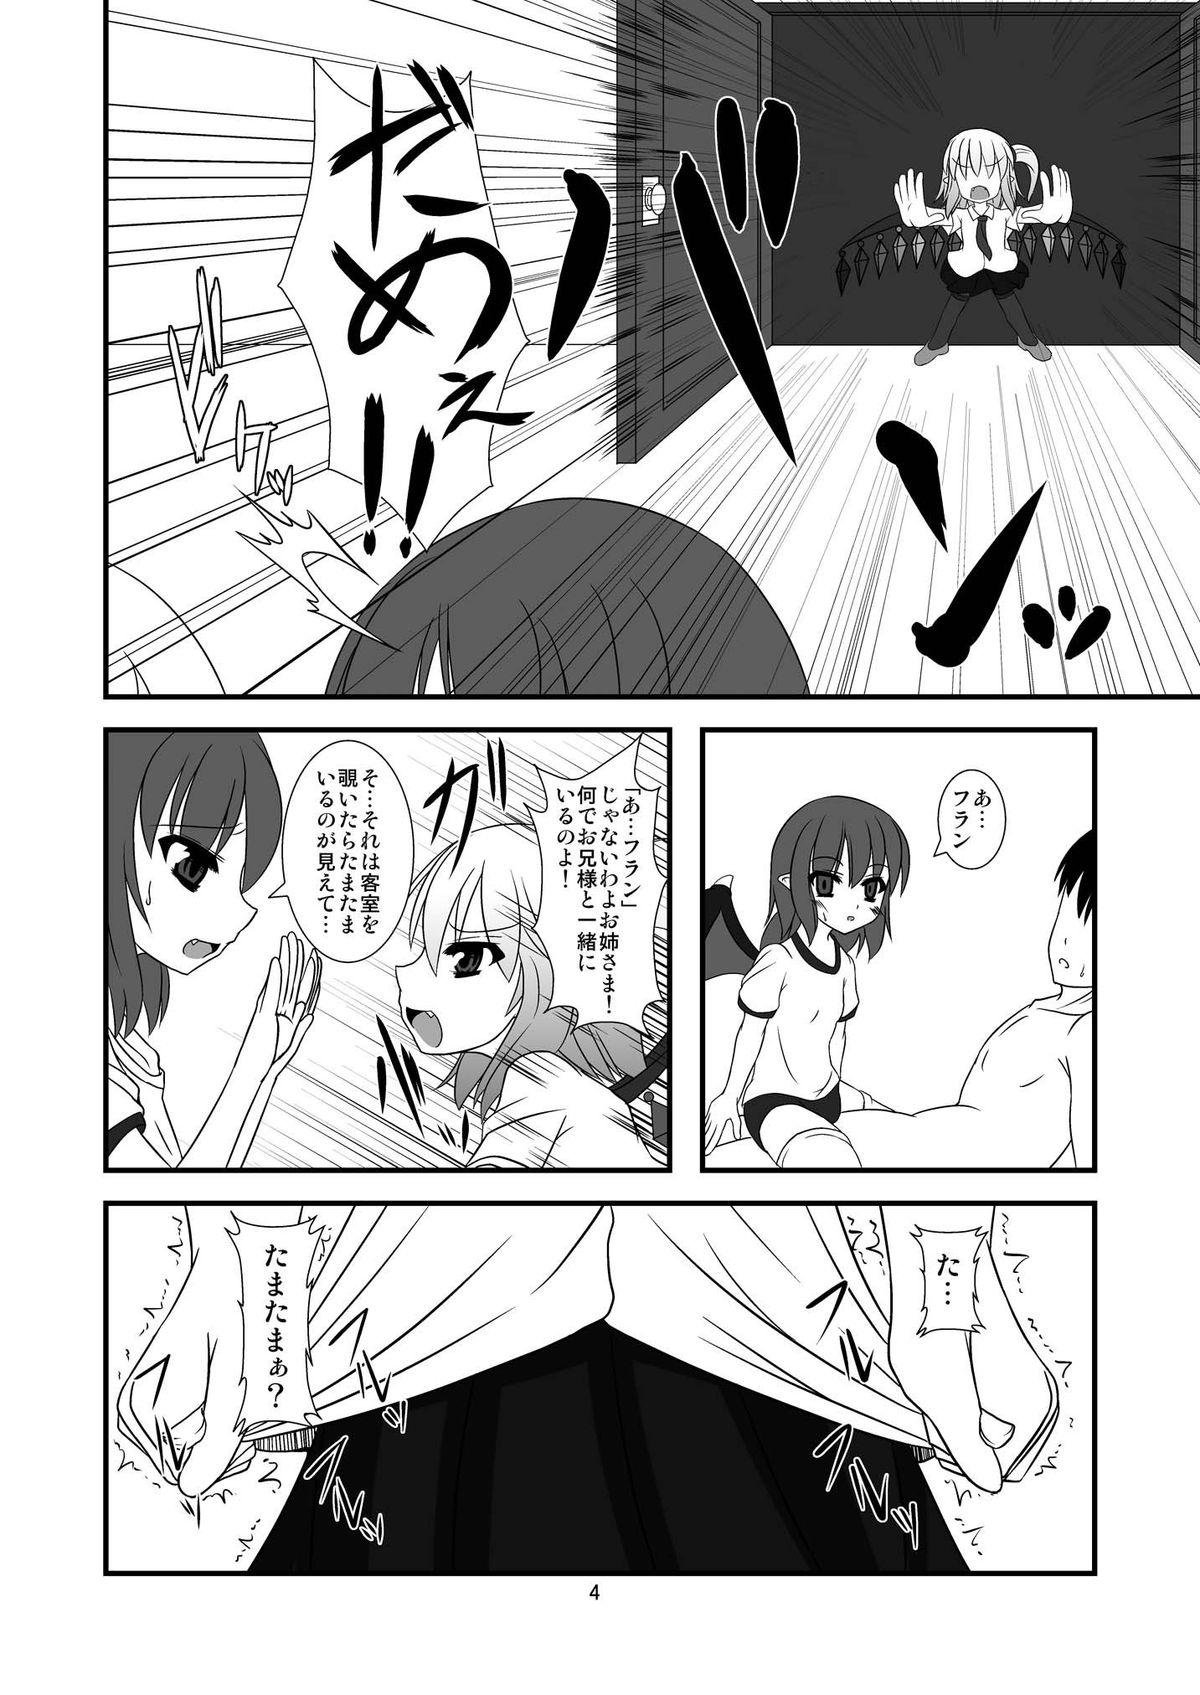 Women Sucking Dicks Touhou Do M Hoihoi - Touhou project All - Page 4